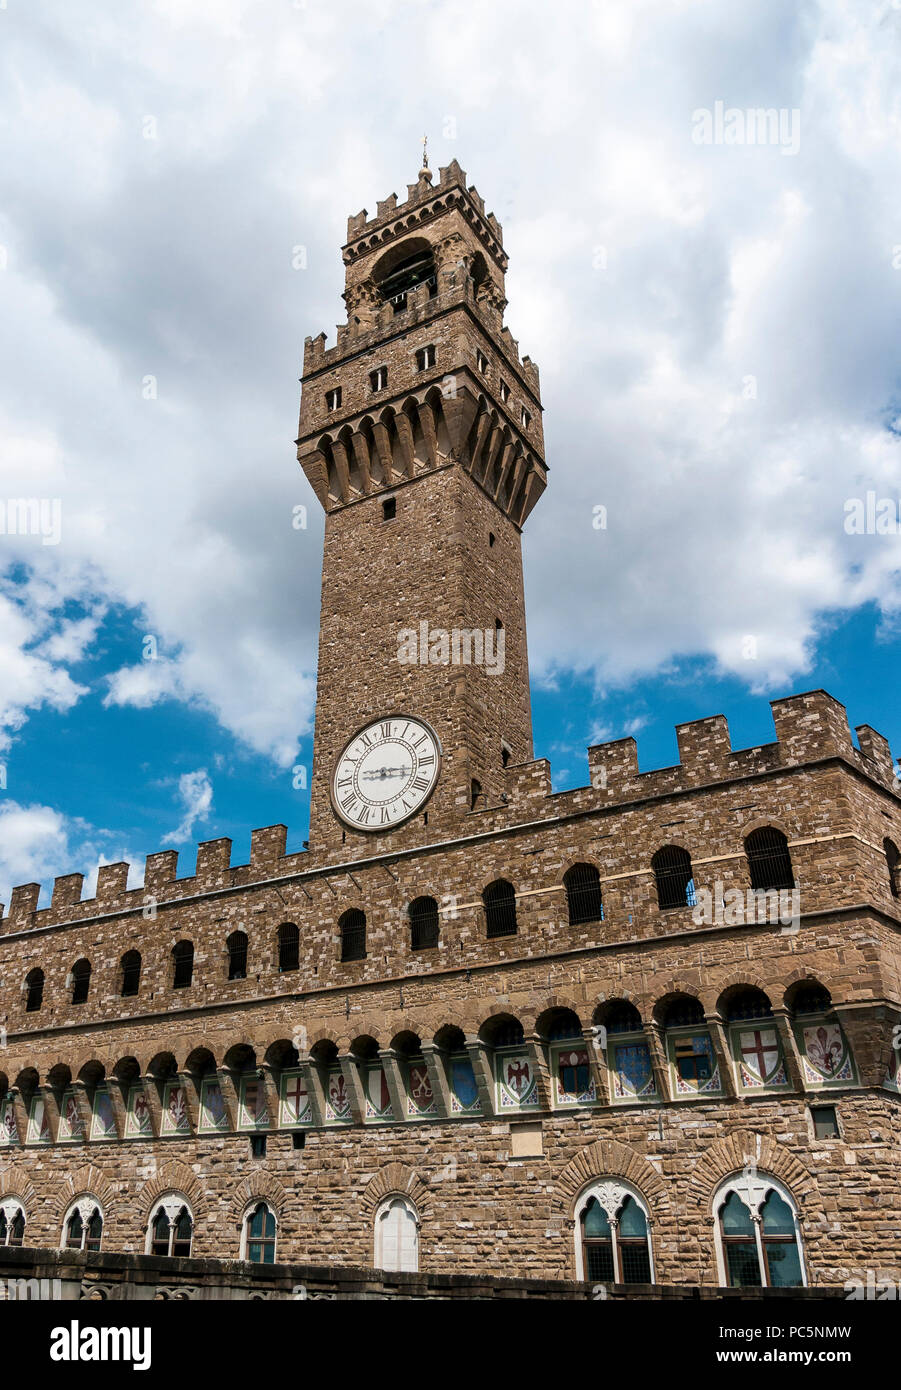 The arches of the The Palazzo Vecchio, the town hall of Florence, Italy. Taken from Piazzale Michelangelo Stock Photo